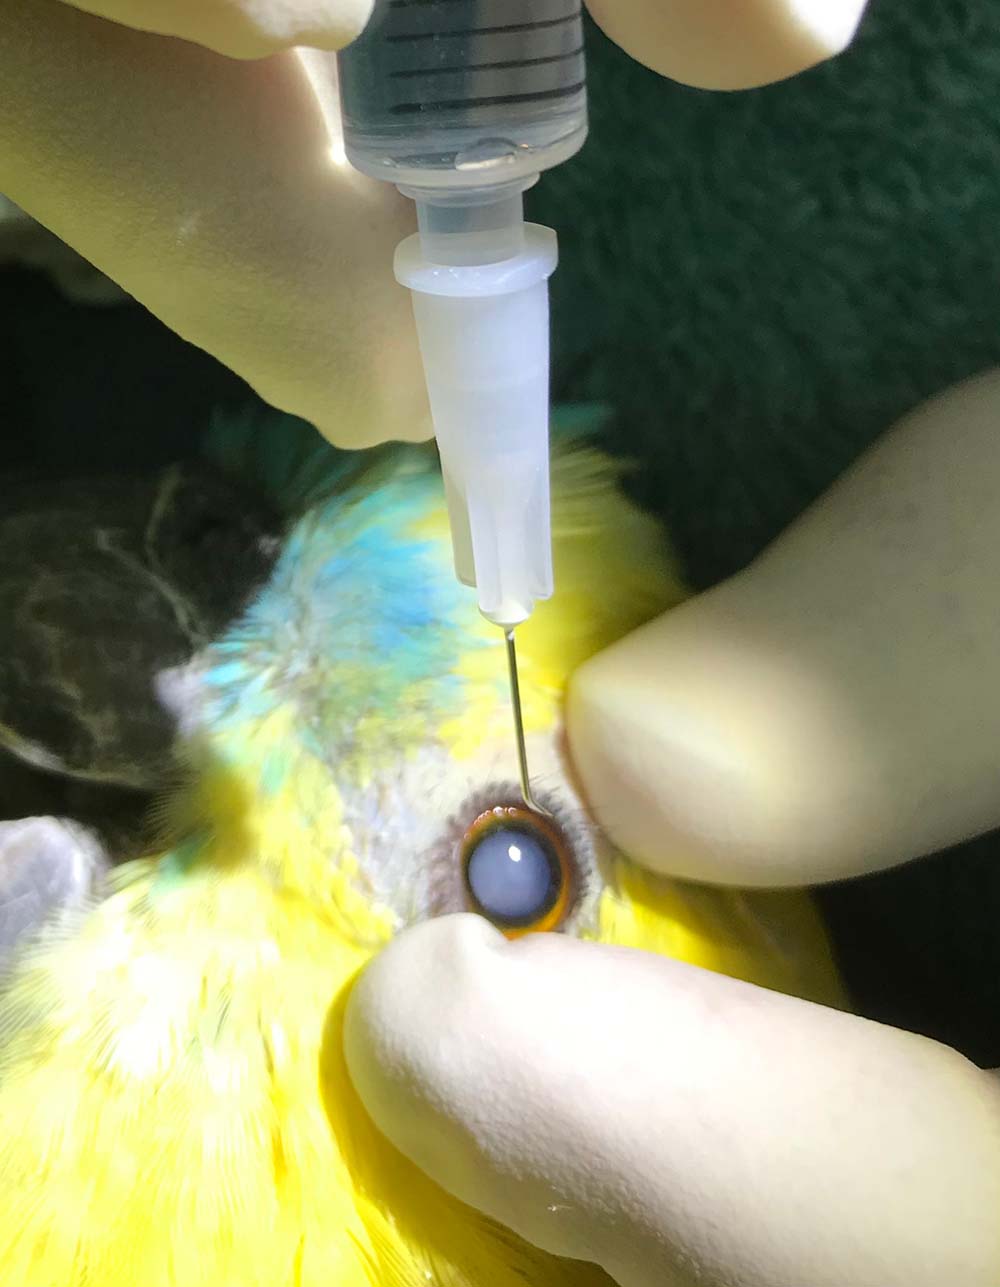 Figure 2. Incising the lens capsule and breaking down the cataract material using the hypodermic needle “fish hook”.